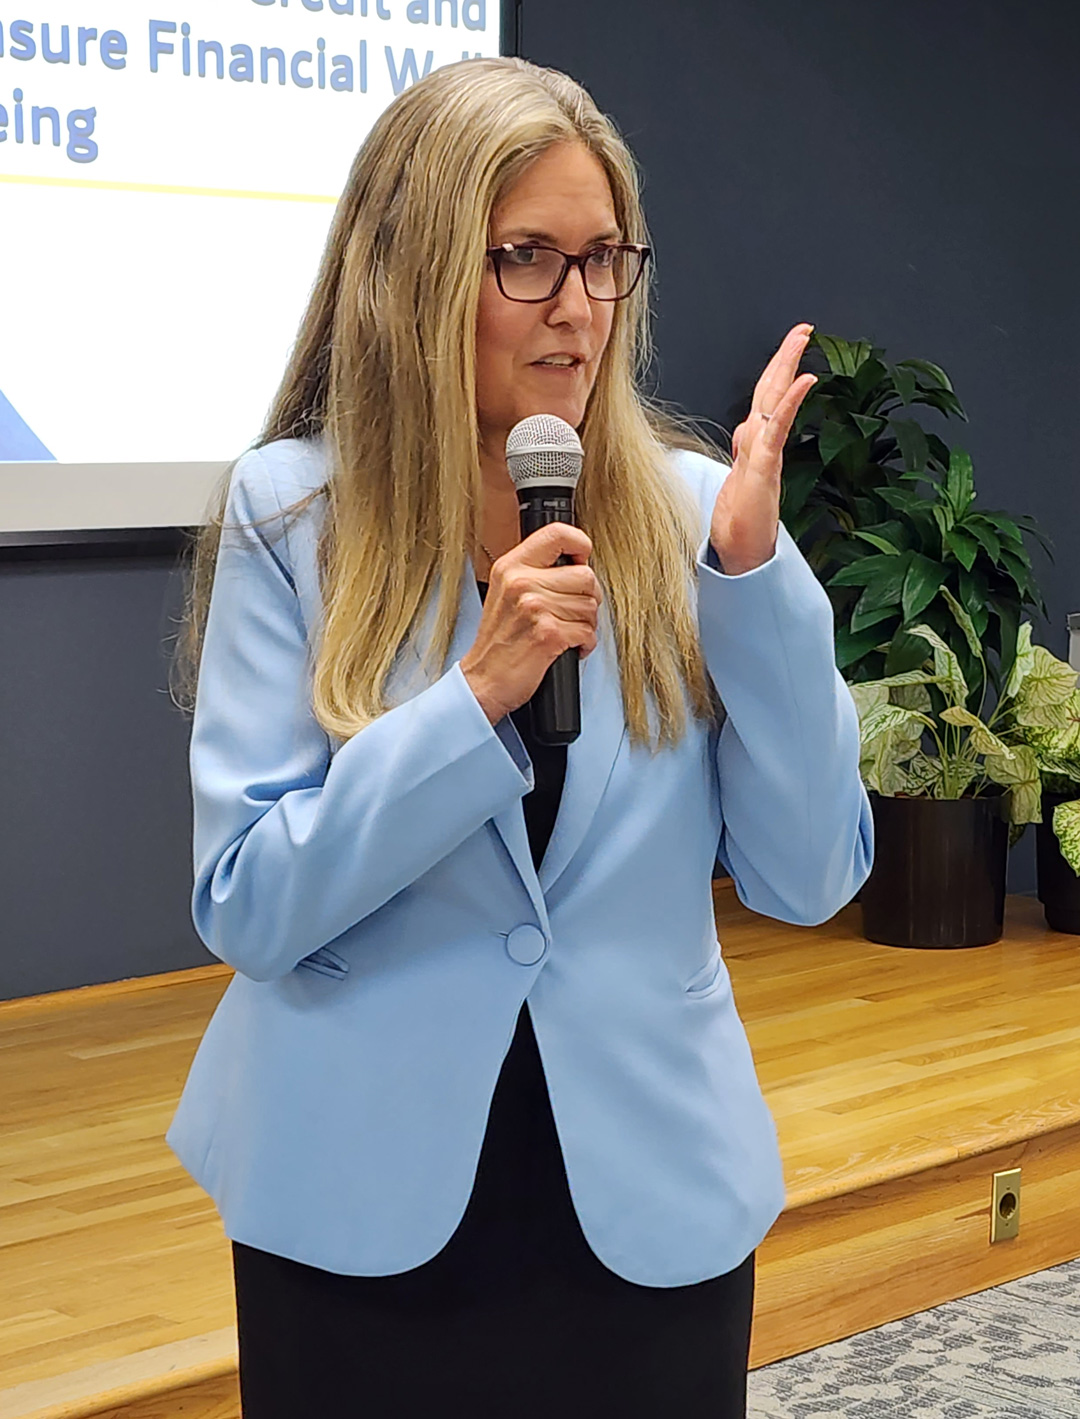 Credit unions continue to fight interchange legislation at the federal level in anticipation of Congress's return in September. We were excited to have the opportunity to catch up with Congresswoman Wexton at the Aug. 30 reception in NoVA.